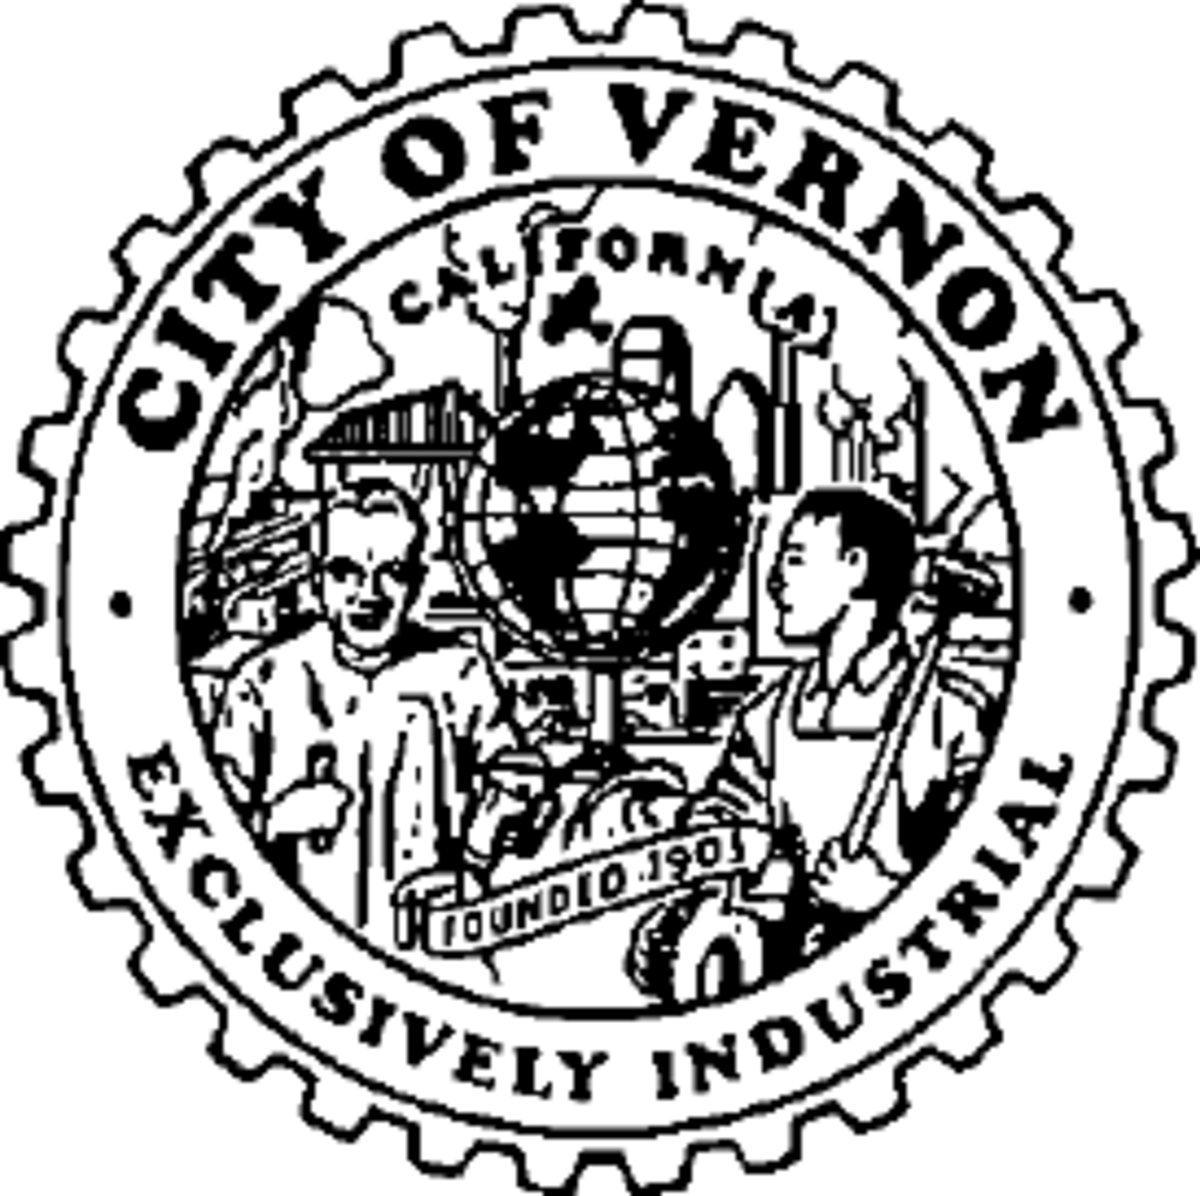 The official seal of the City of Vernon